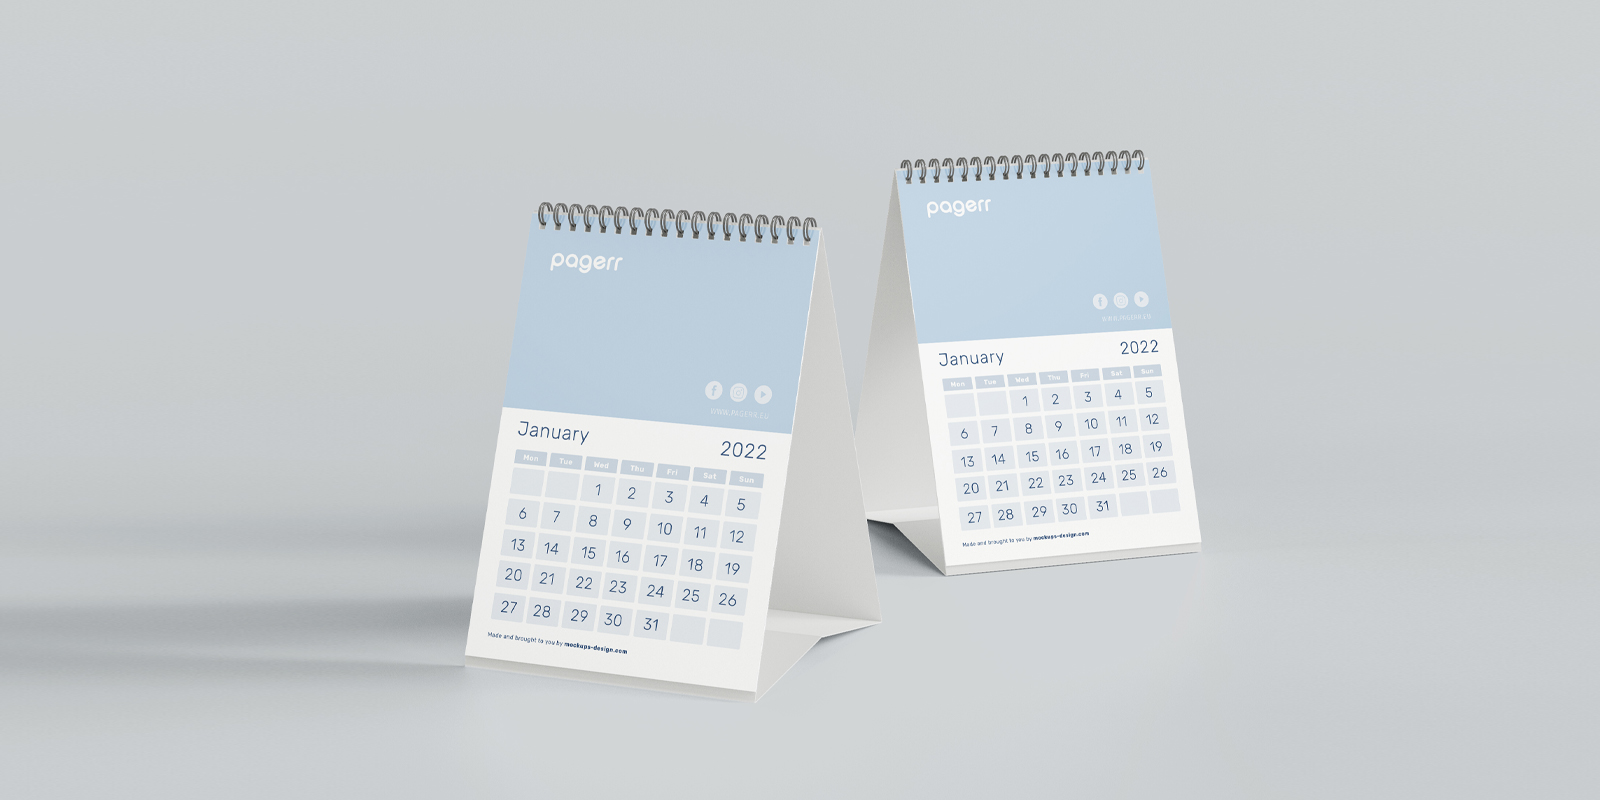 Desk calendars in Bucharest - Print with Pagerr